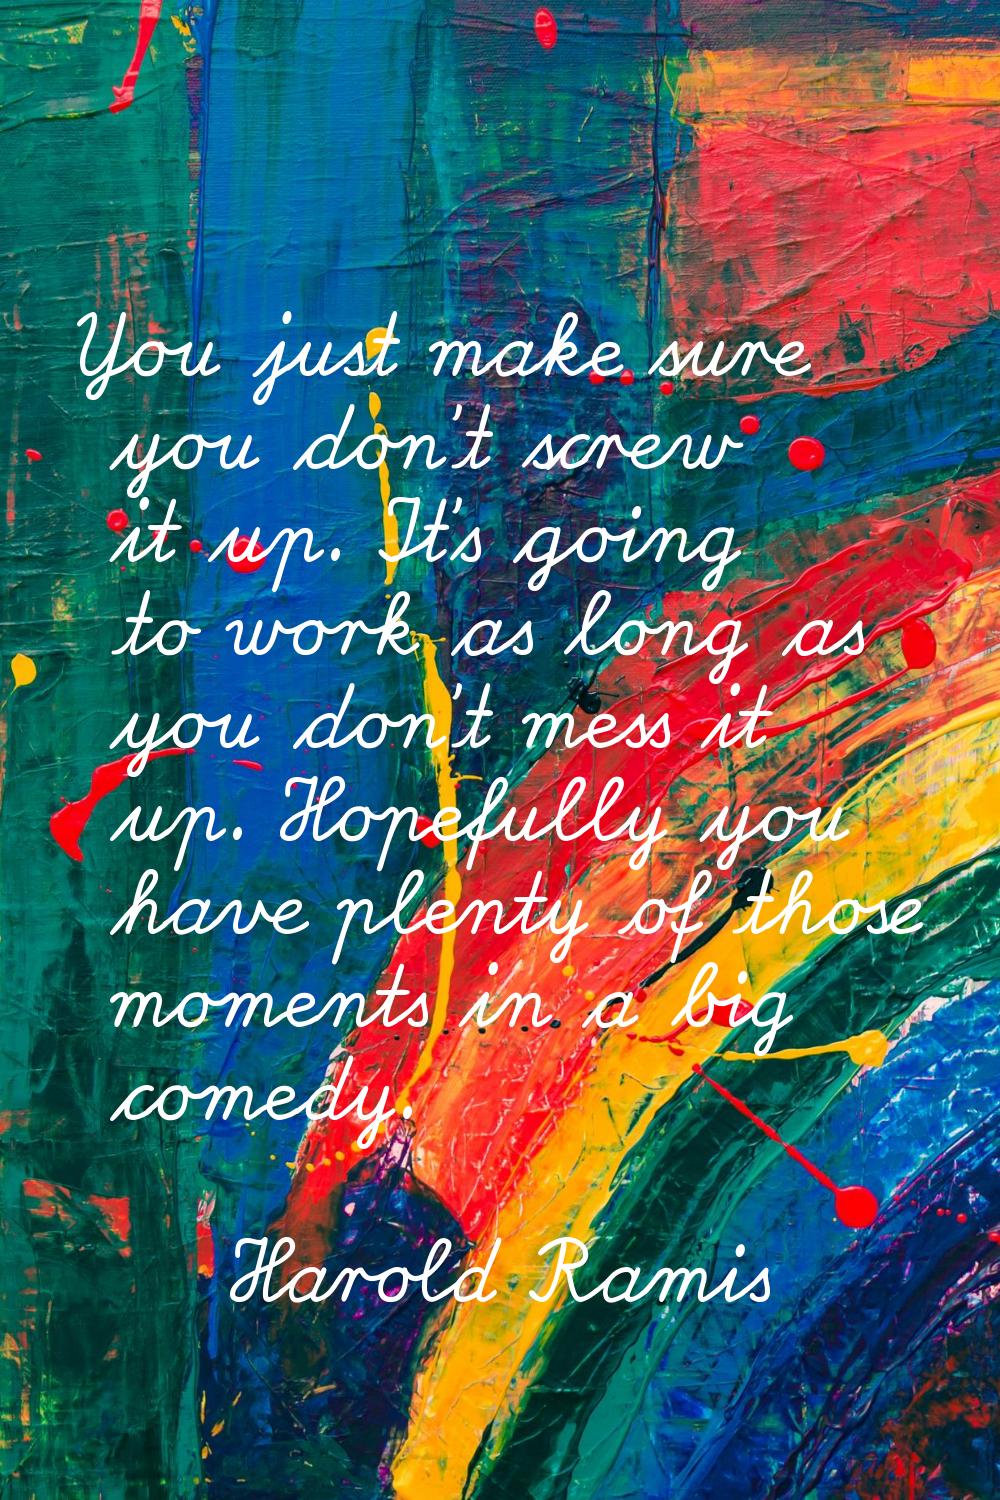 You just make sure you don't screw it up. It's going to work as long as you don't mess it up. Hopef